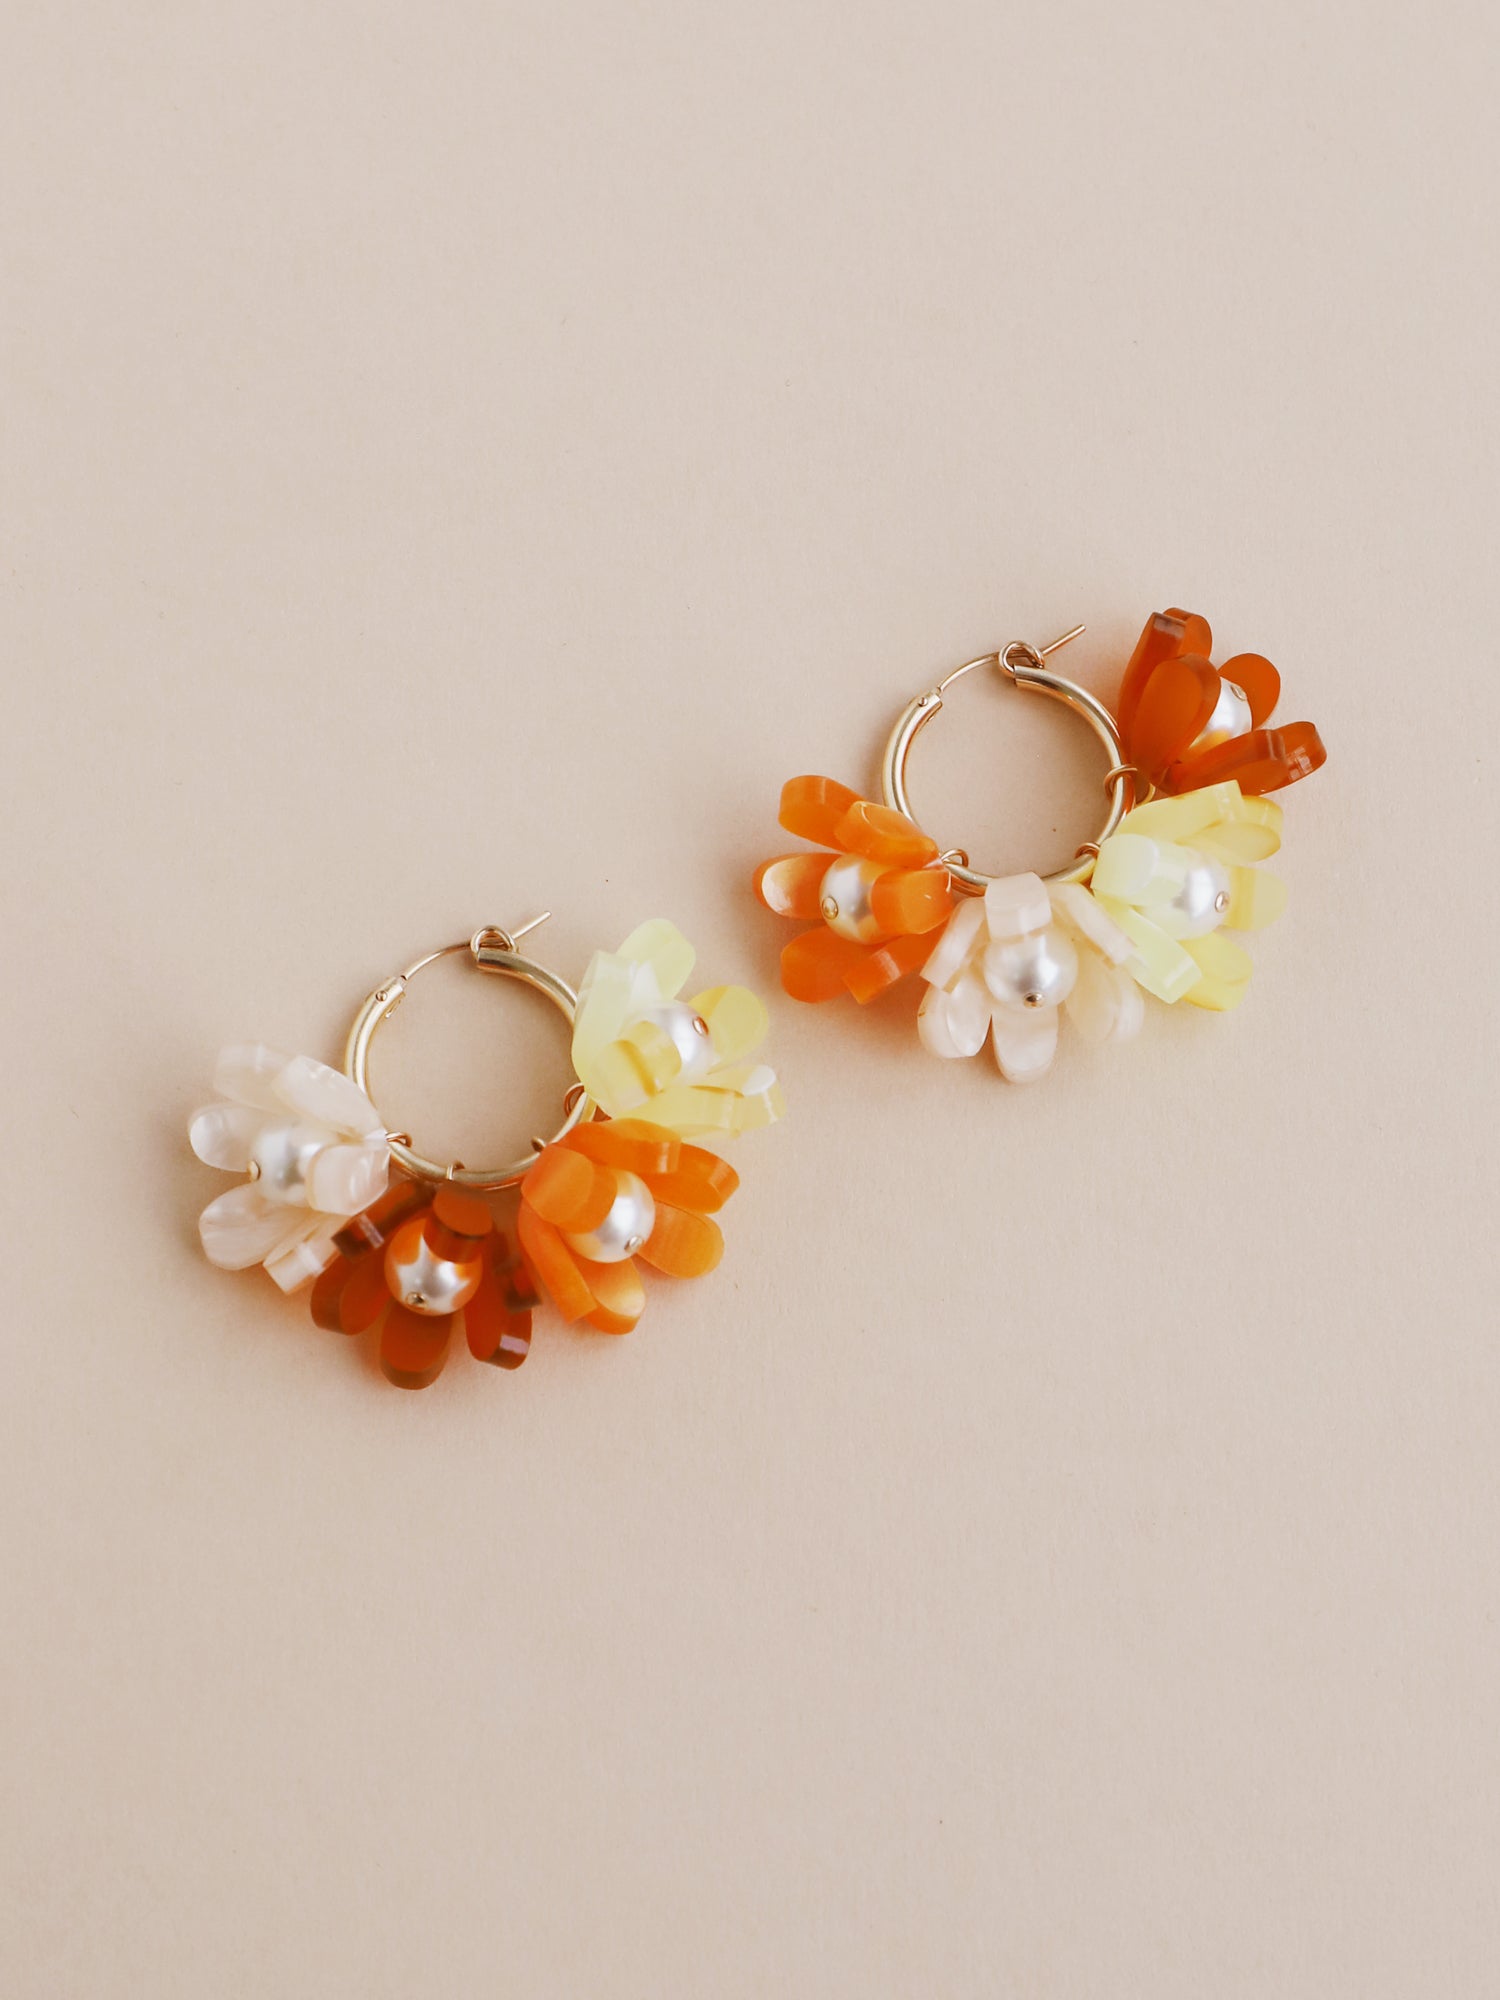 Statement tulip meadow hoop earrings with 8 interchangeable flowers in cream, orange & yellow shades. Made from heat-formed acrylic with high quality glass pearls and 14k gold-filled findings. Handmade in the UK by Wolf & Moon.